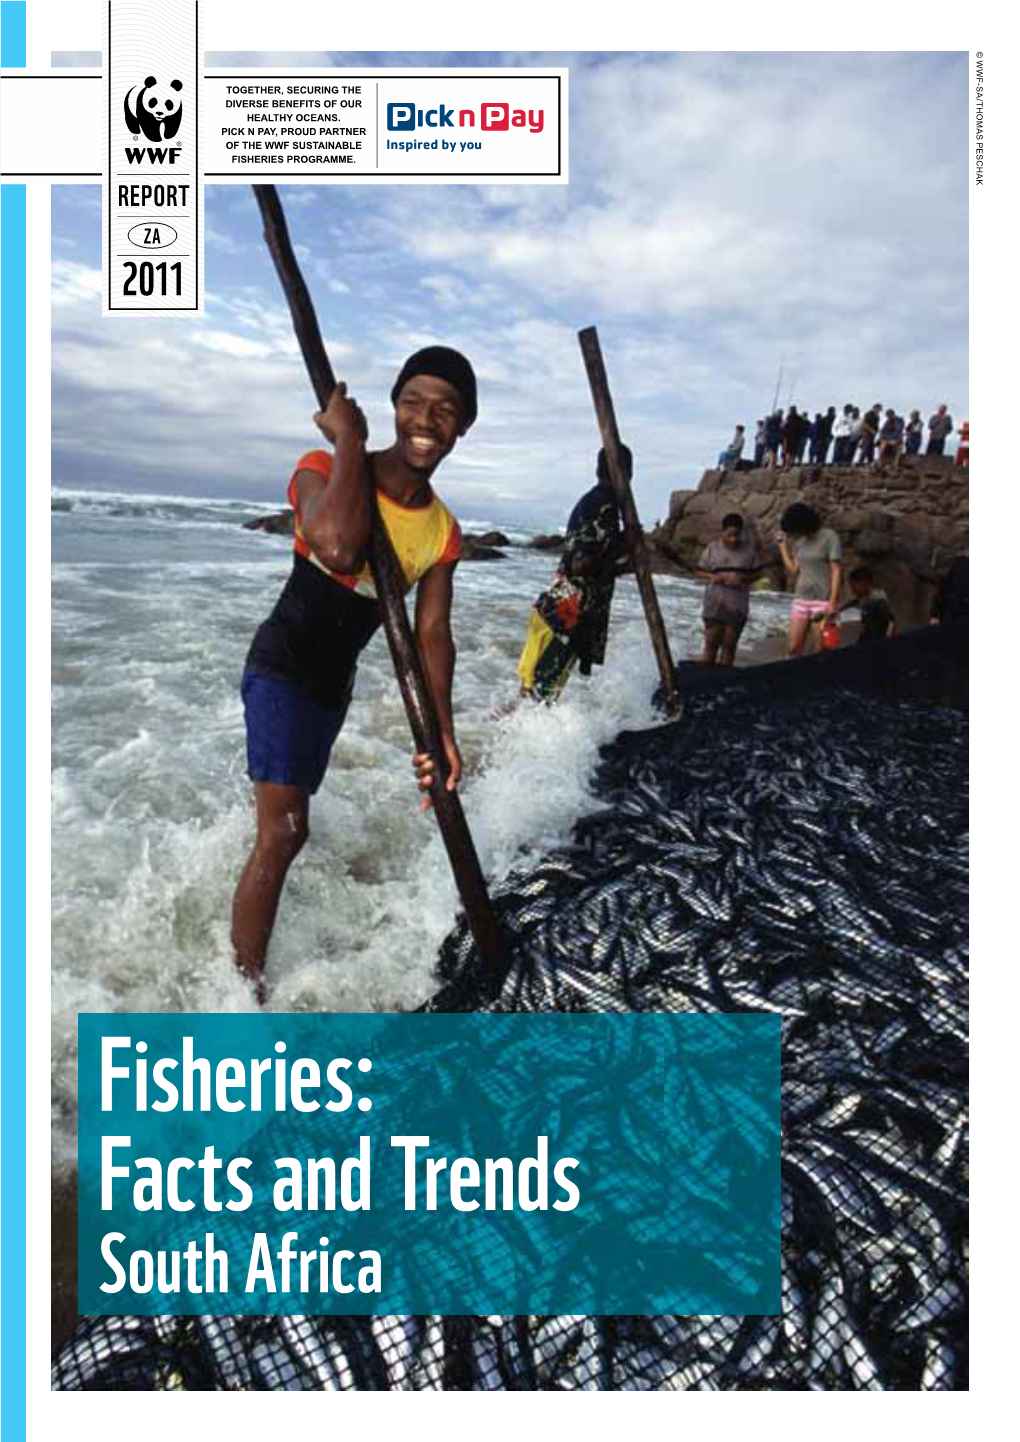 Fisheries: Facts and Trends South Africa by Morné Du Plessis Chief Executive: Foreword WWF South Africa